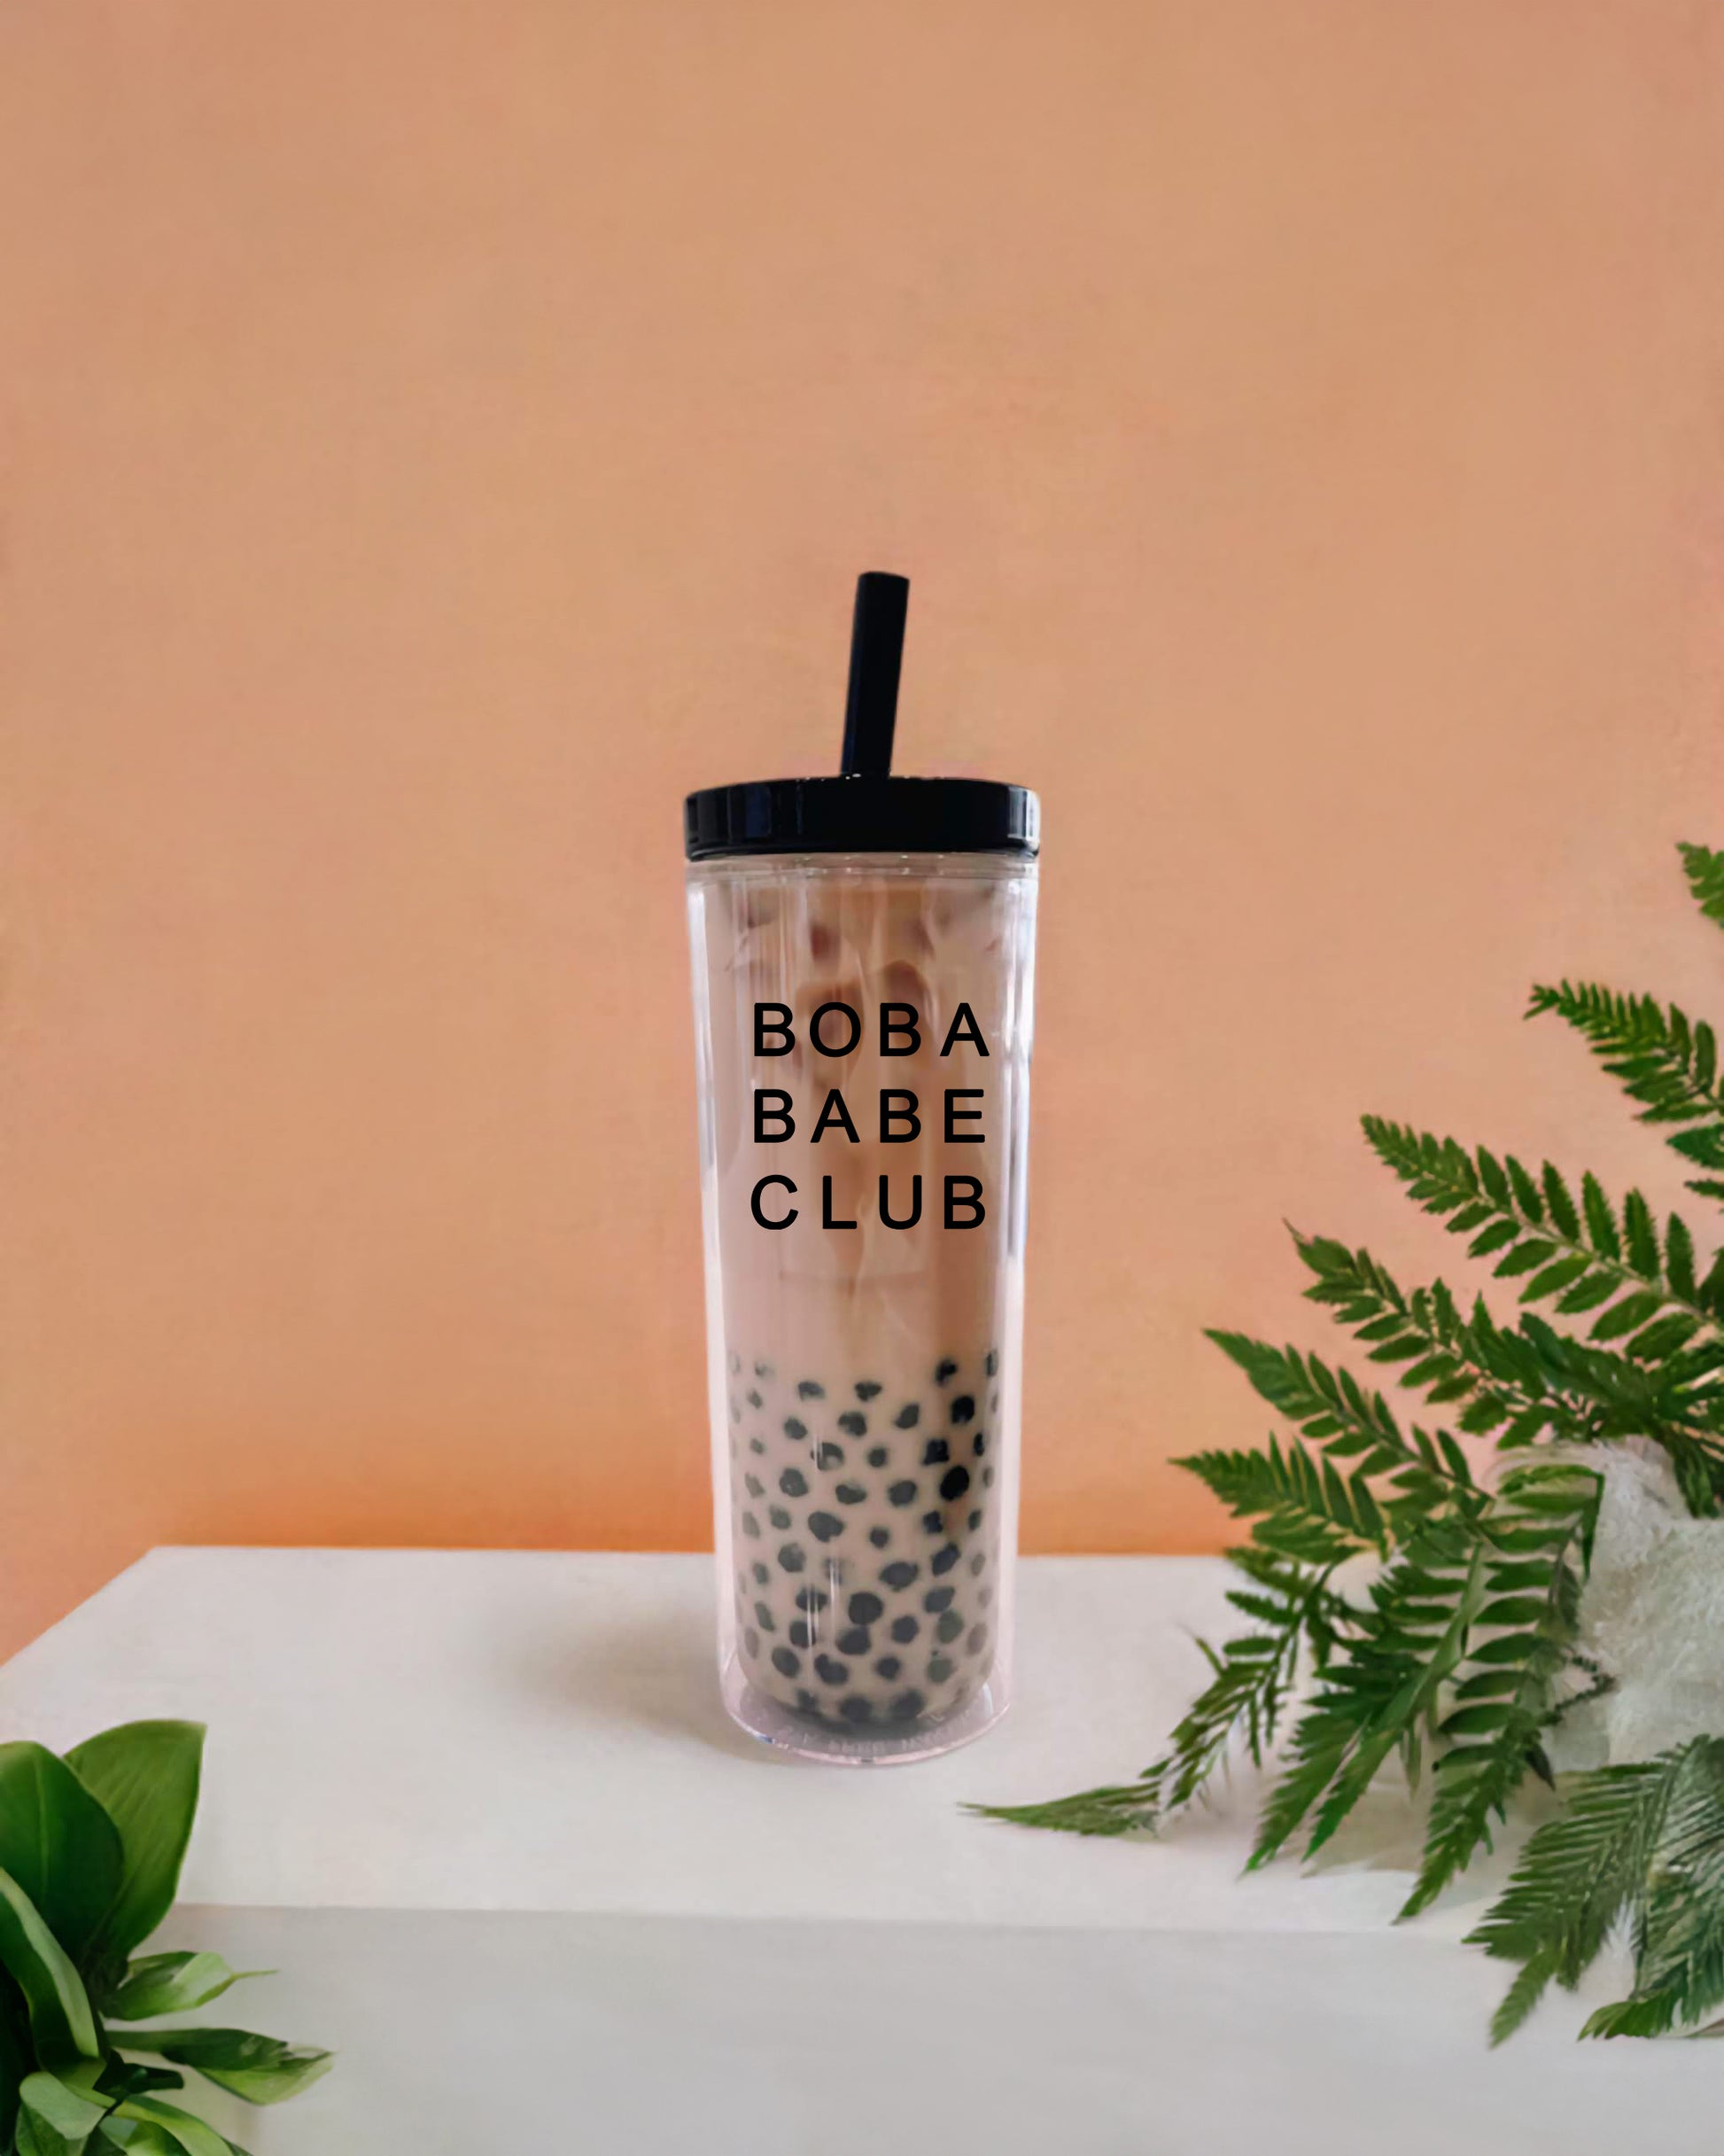 boba babe club tumbler, boba near me, tumbler, tumbler under 30, gifts for her, cute gifts, christmas gifts, birthday gifts, bachelorette gifts, boba tumbler, eco friendly, re-usable tumbler